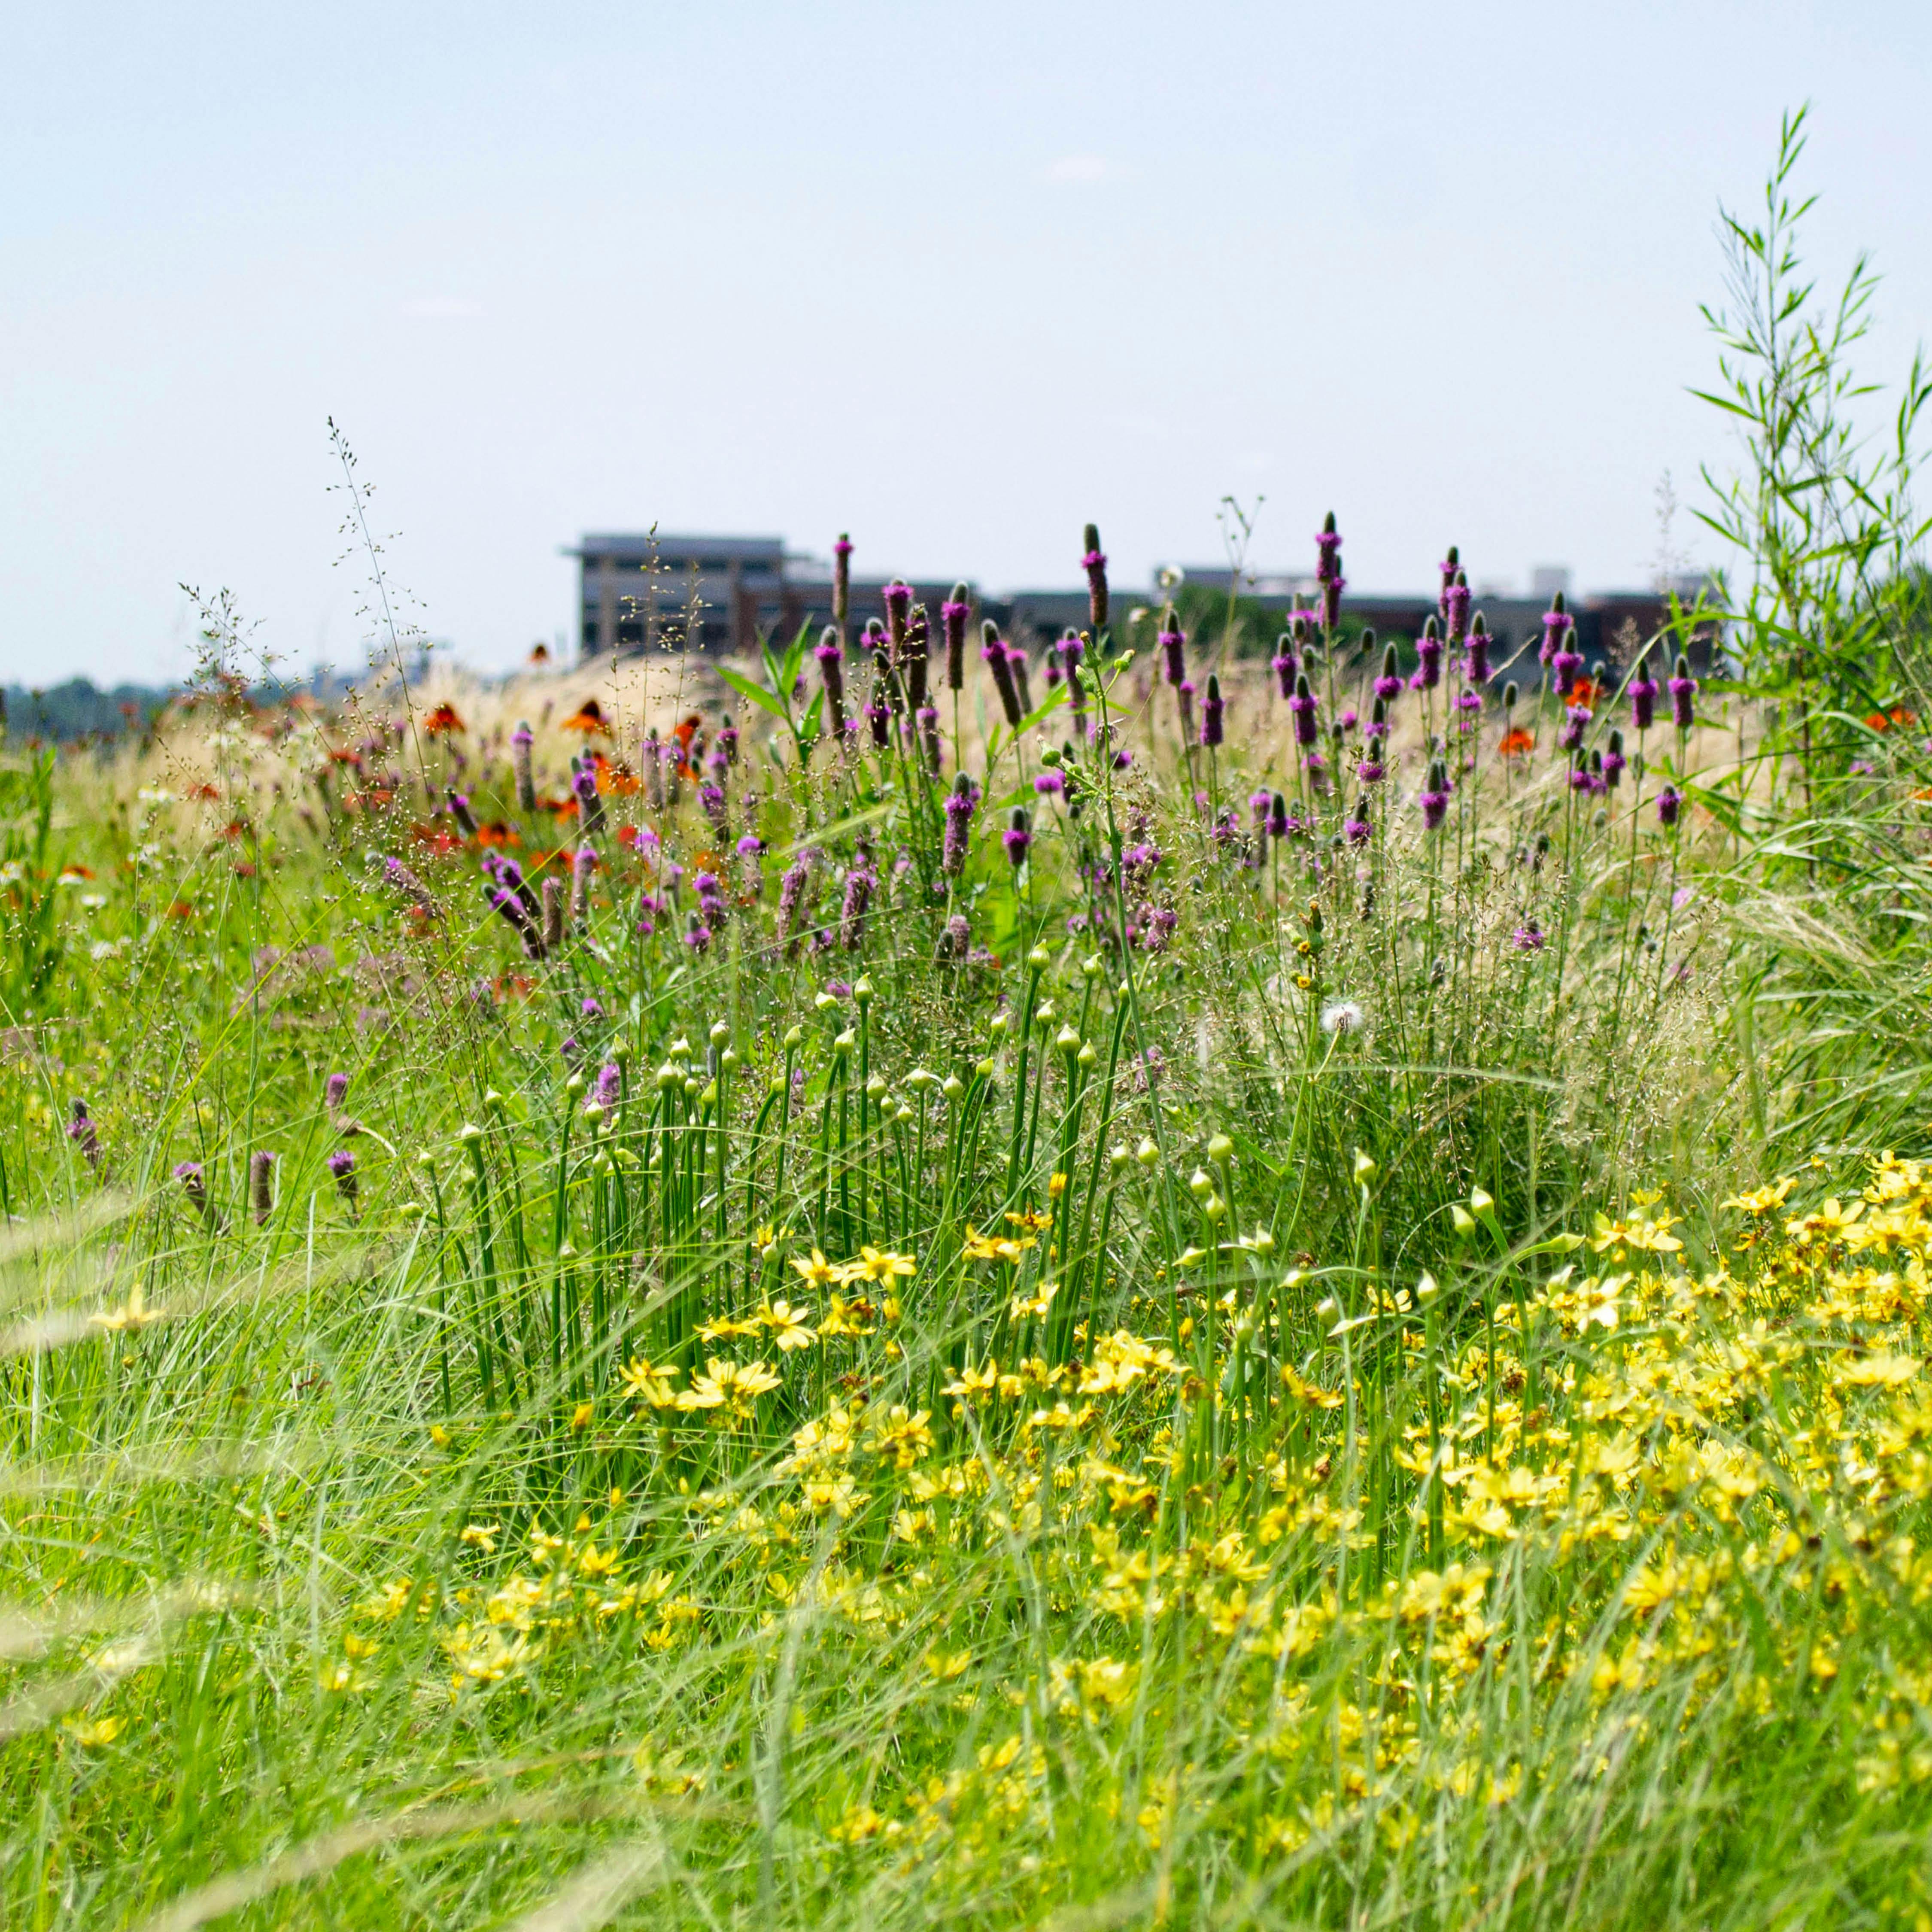 A photograph of a sunny green roof, with meadow style planting. A variety of purple, red, yellow, and white flowers are visible amongst lots of greenery. The top of a building is out of focus in the background.